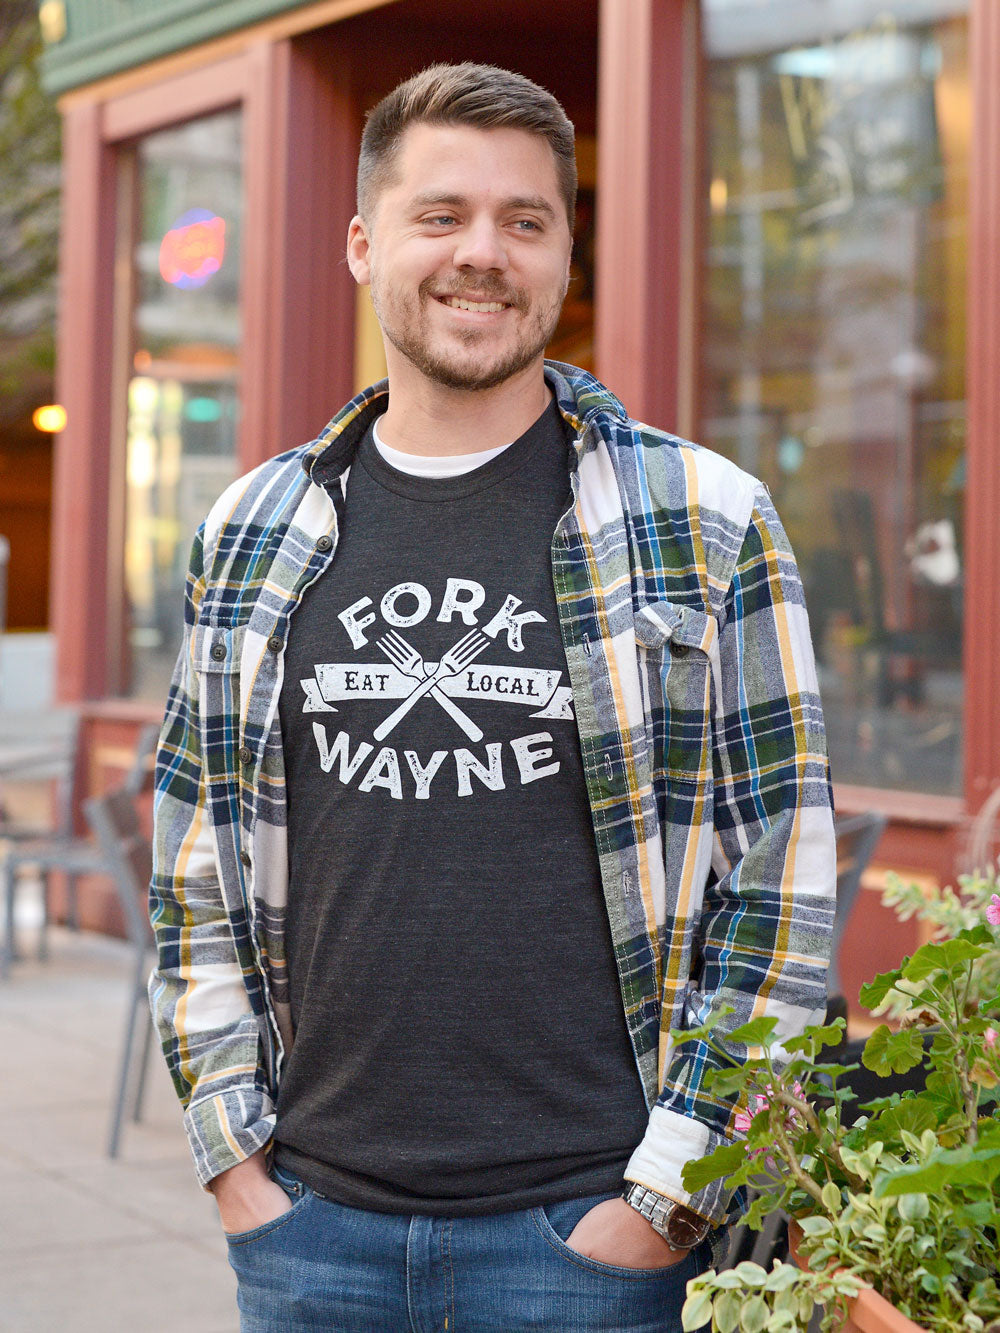 Fork Wayne Eat Local t-shirt on model outside pizza place